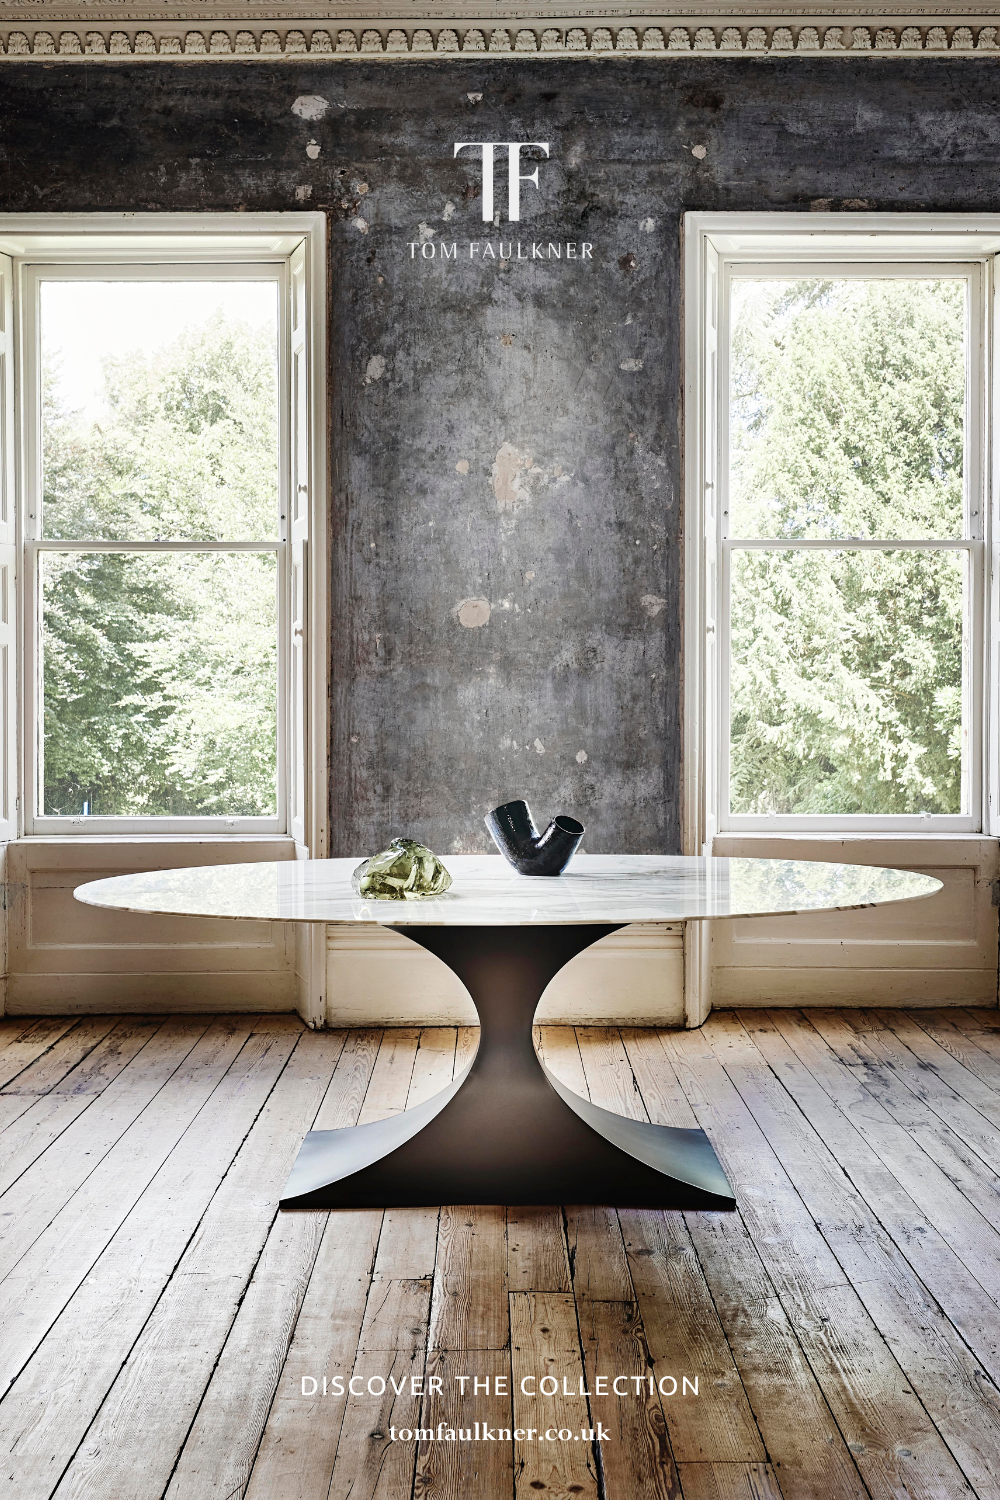 Oval dining tables are getting day by day
popular